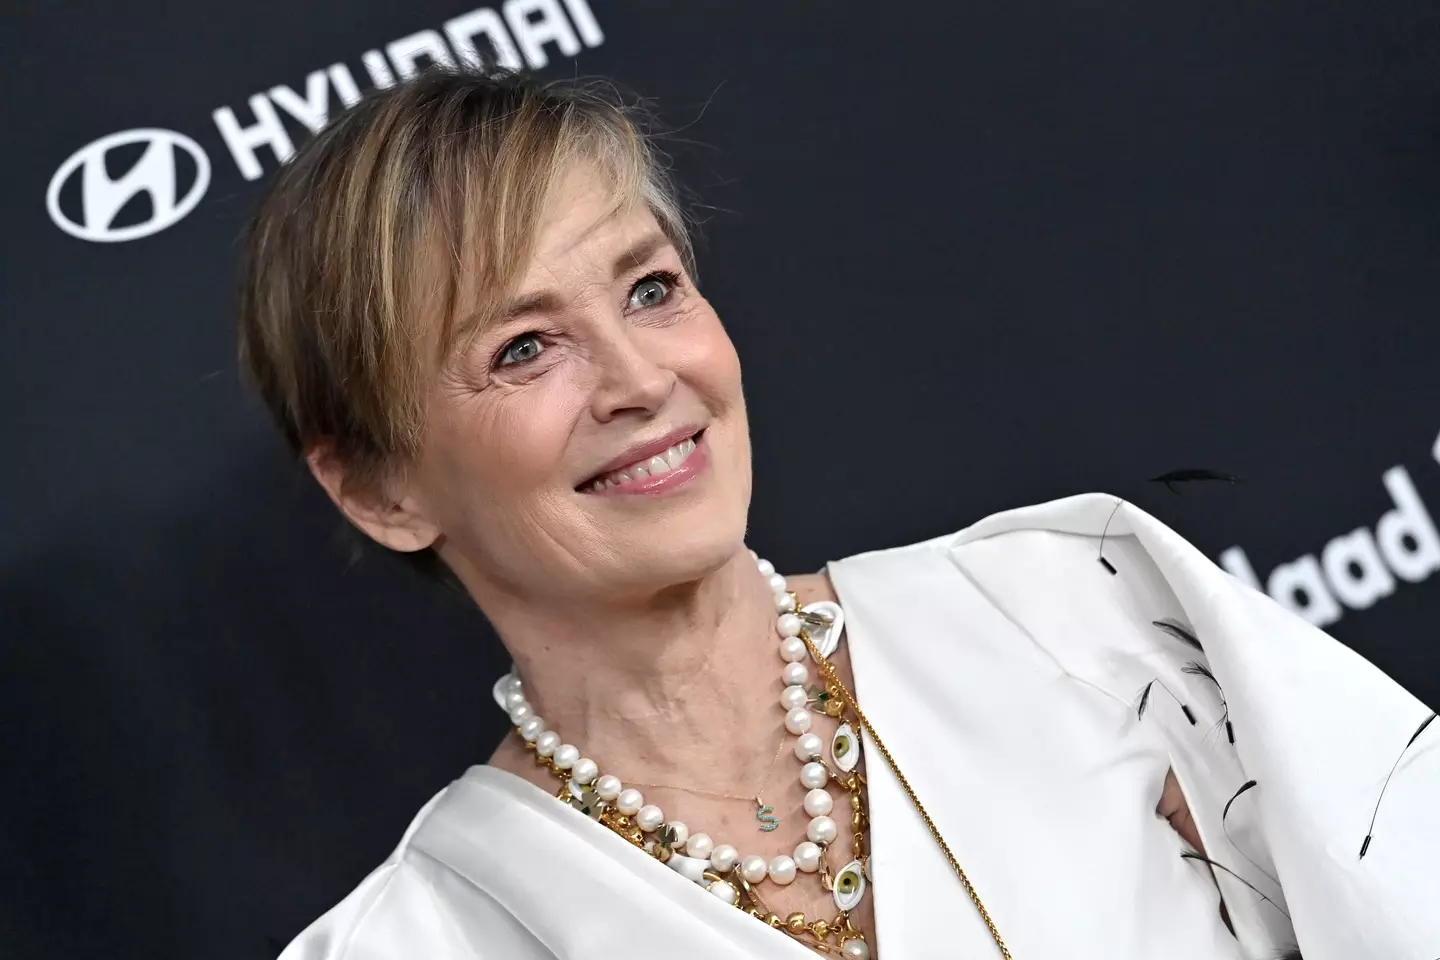 Sharon Stone has a new art exhibition opening next month.